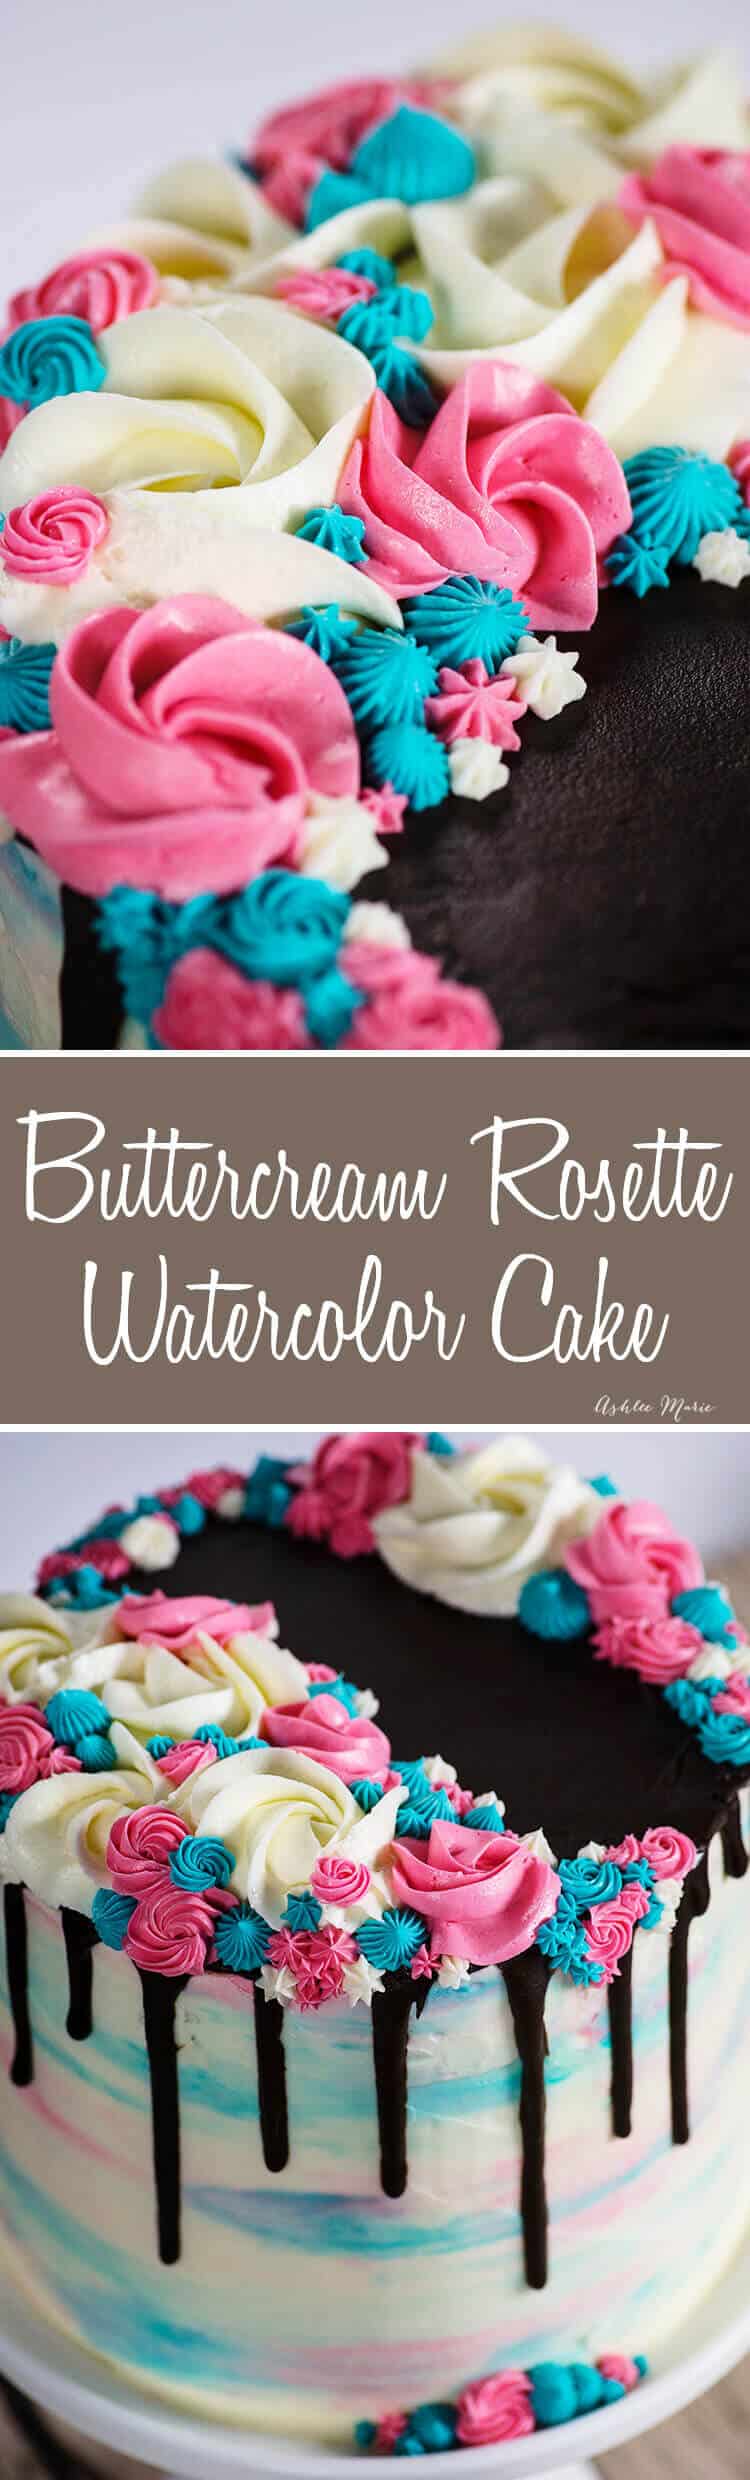 this pink and blue cake features a buttercream watercolor technique, chocolate ganche drips and is covered in pink and blue rosettes and stars - perfect for a gender reveal party